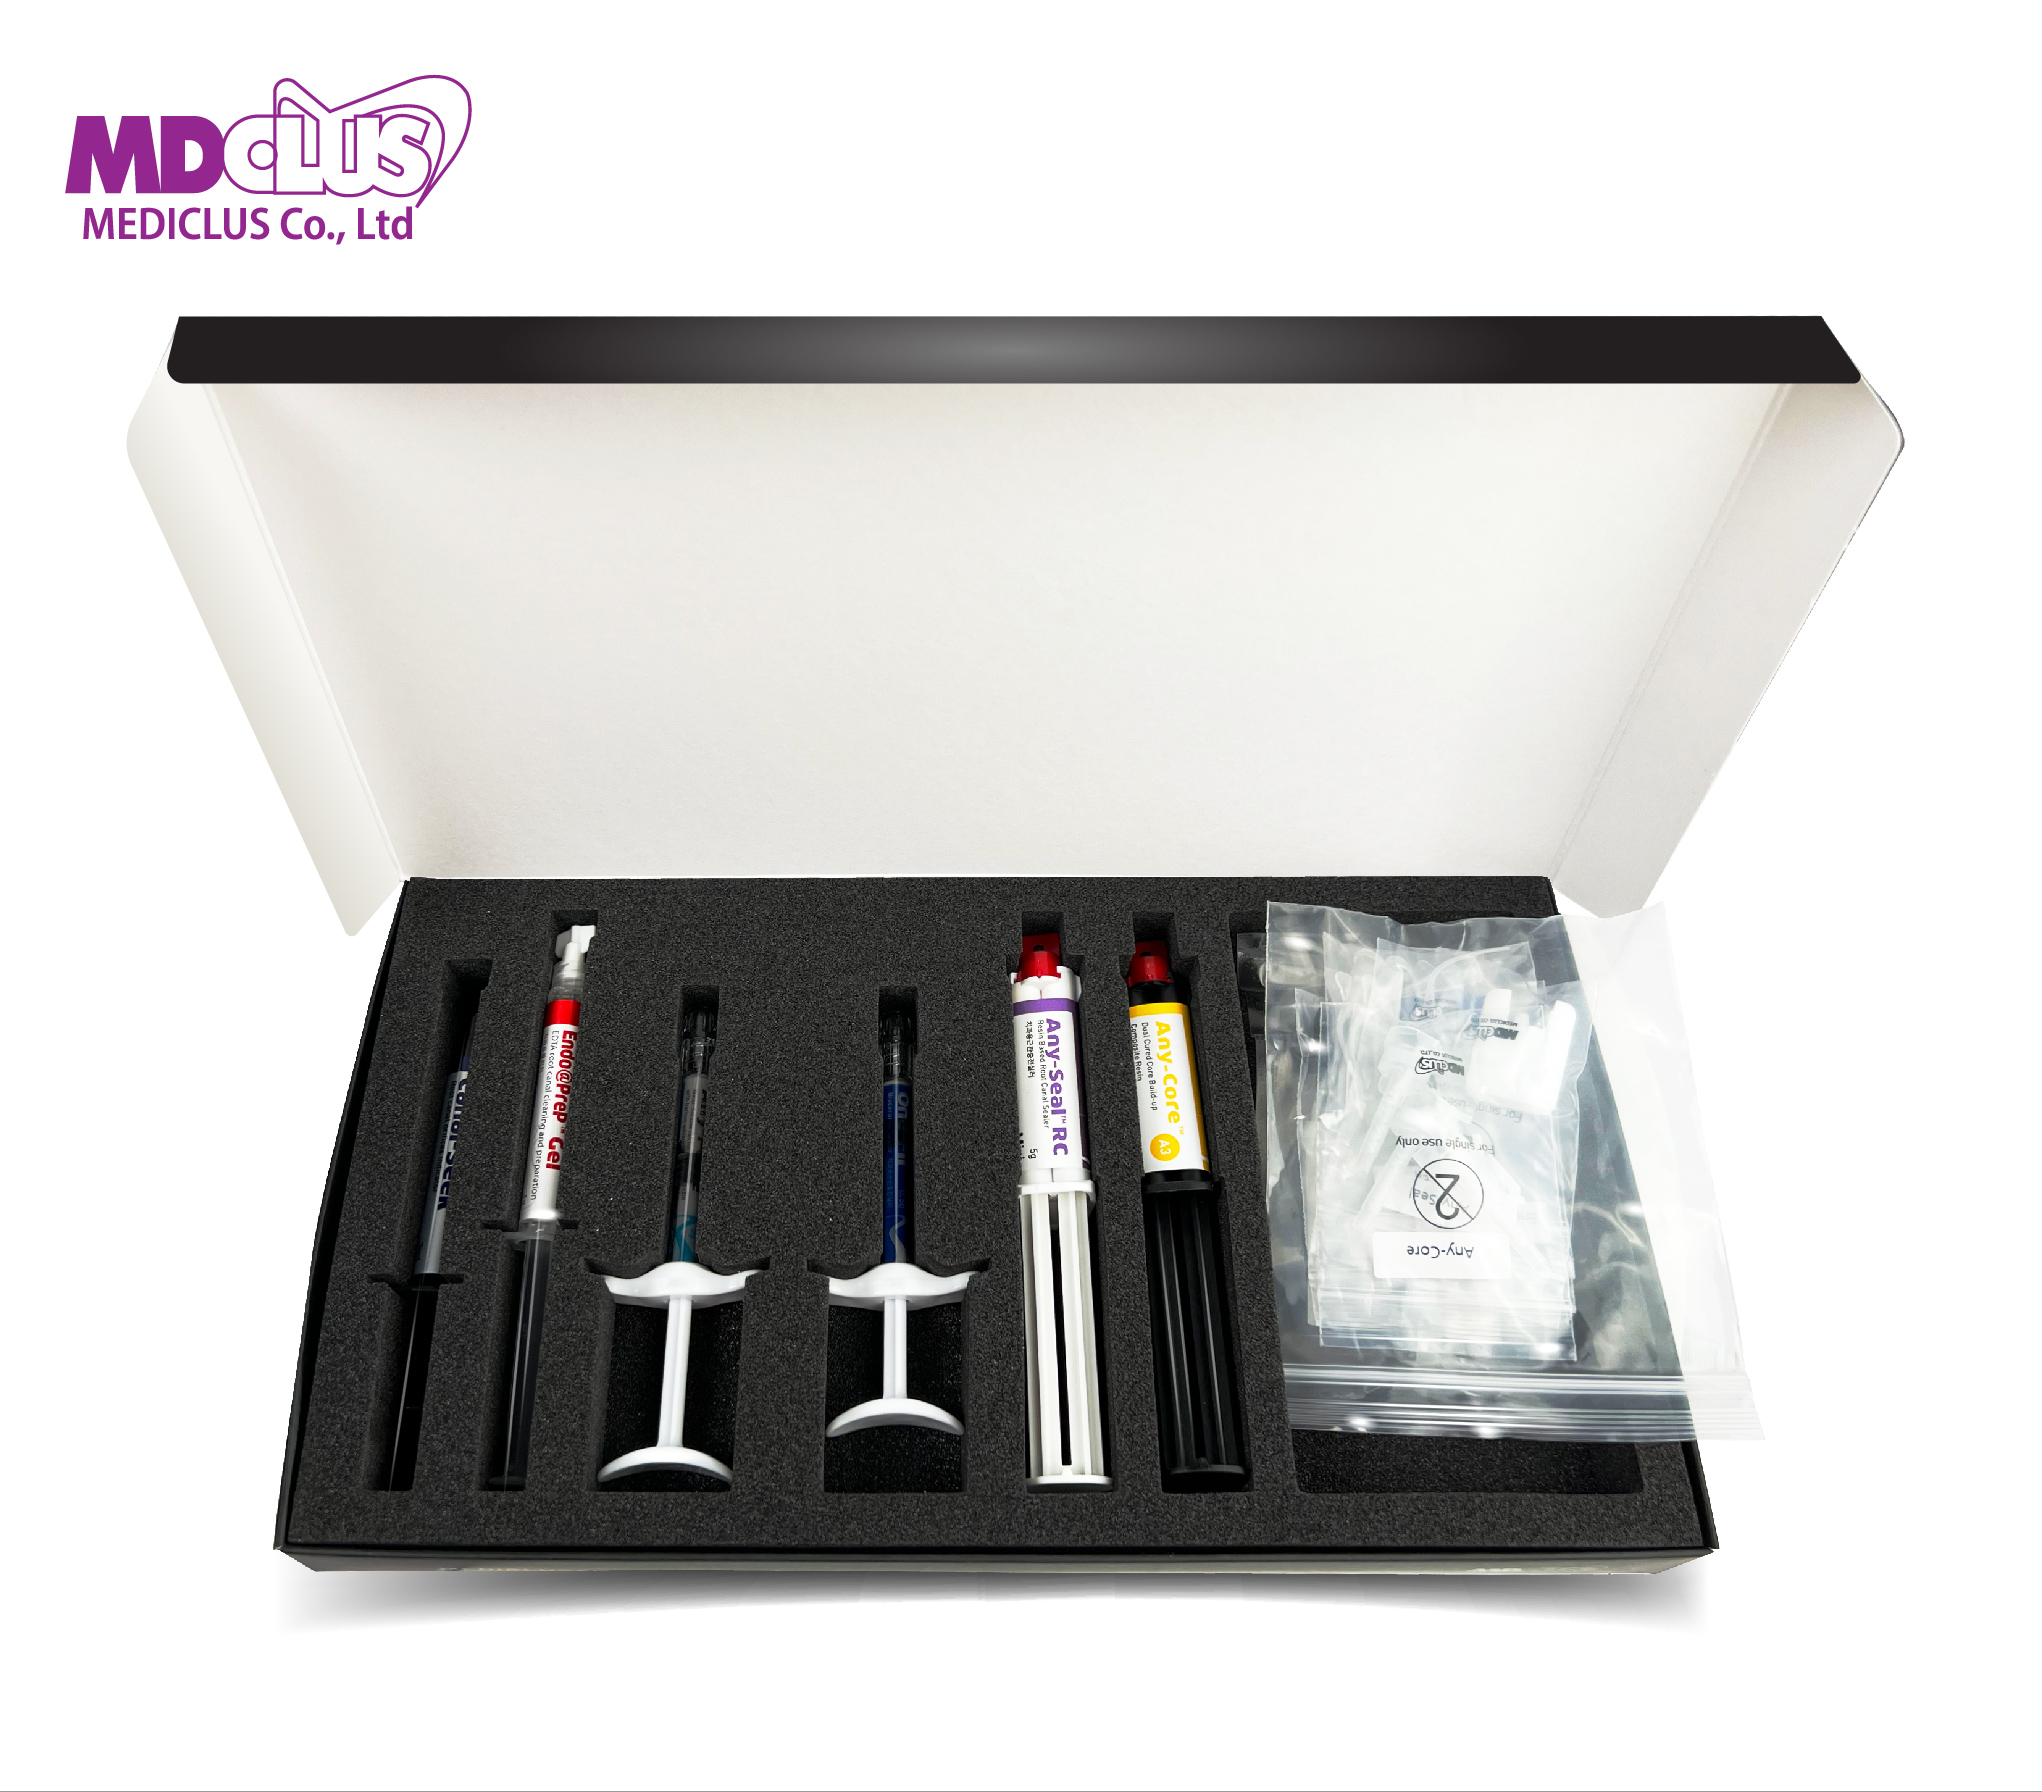 Set Of 3 Mediclus One-Fill And Get Free Mediclus Endo-Solution Kit + Mediclus Endo@PreP Cream, 3gm